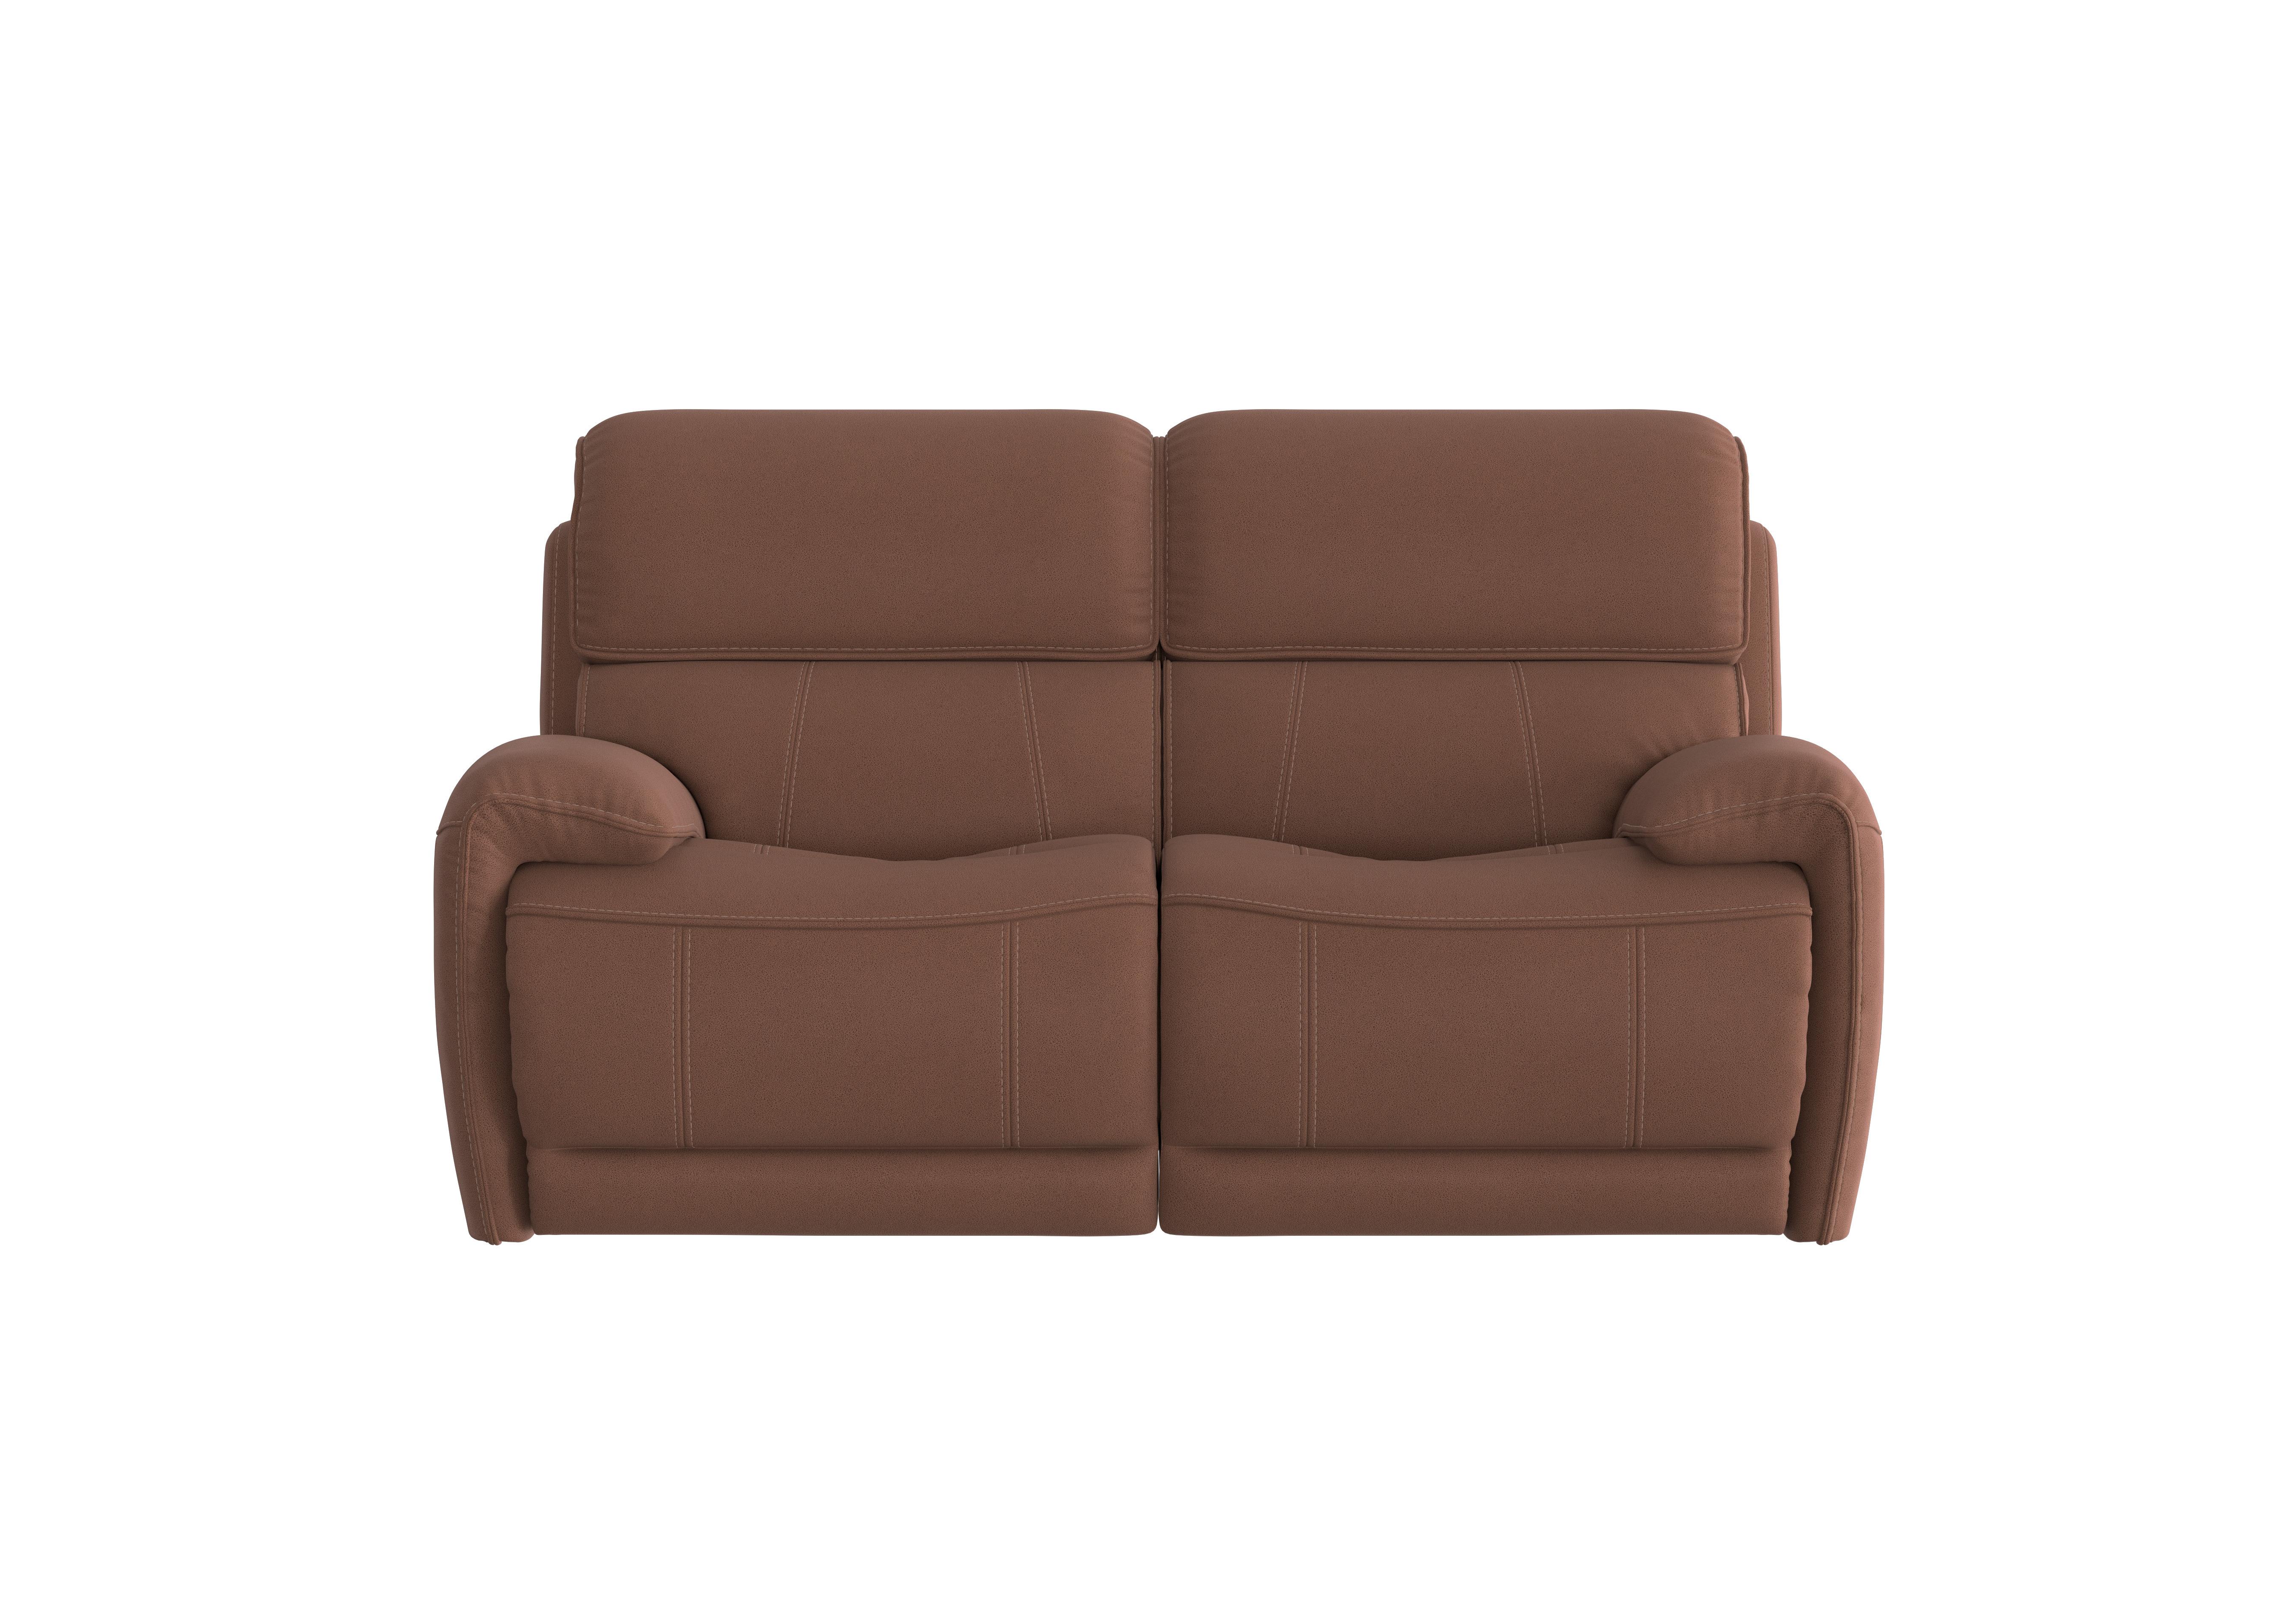 Link 2 Seater Fabric Power Recliner Sofa with Power Headrests in Bfa-Blj-R05 Hazelnut on Furniture Village